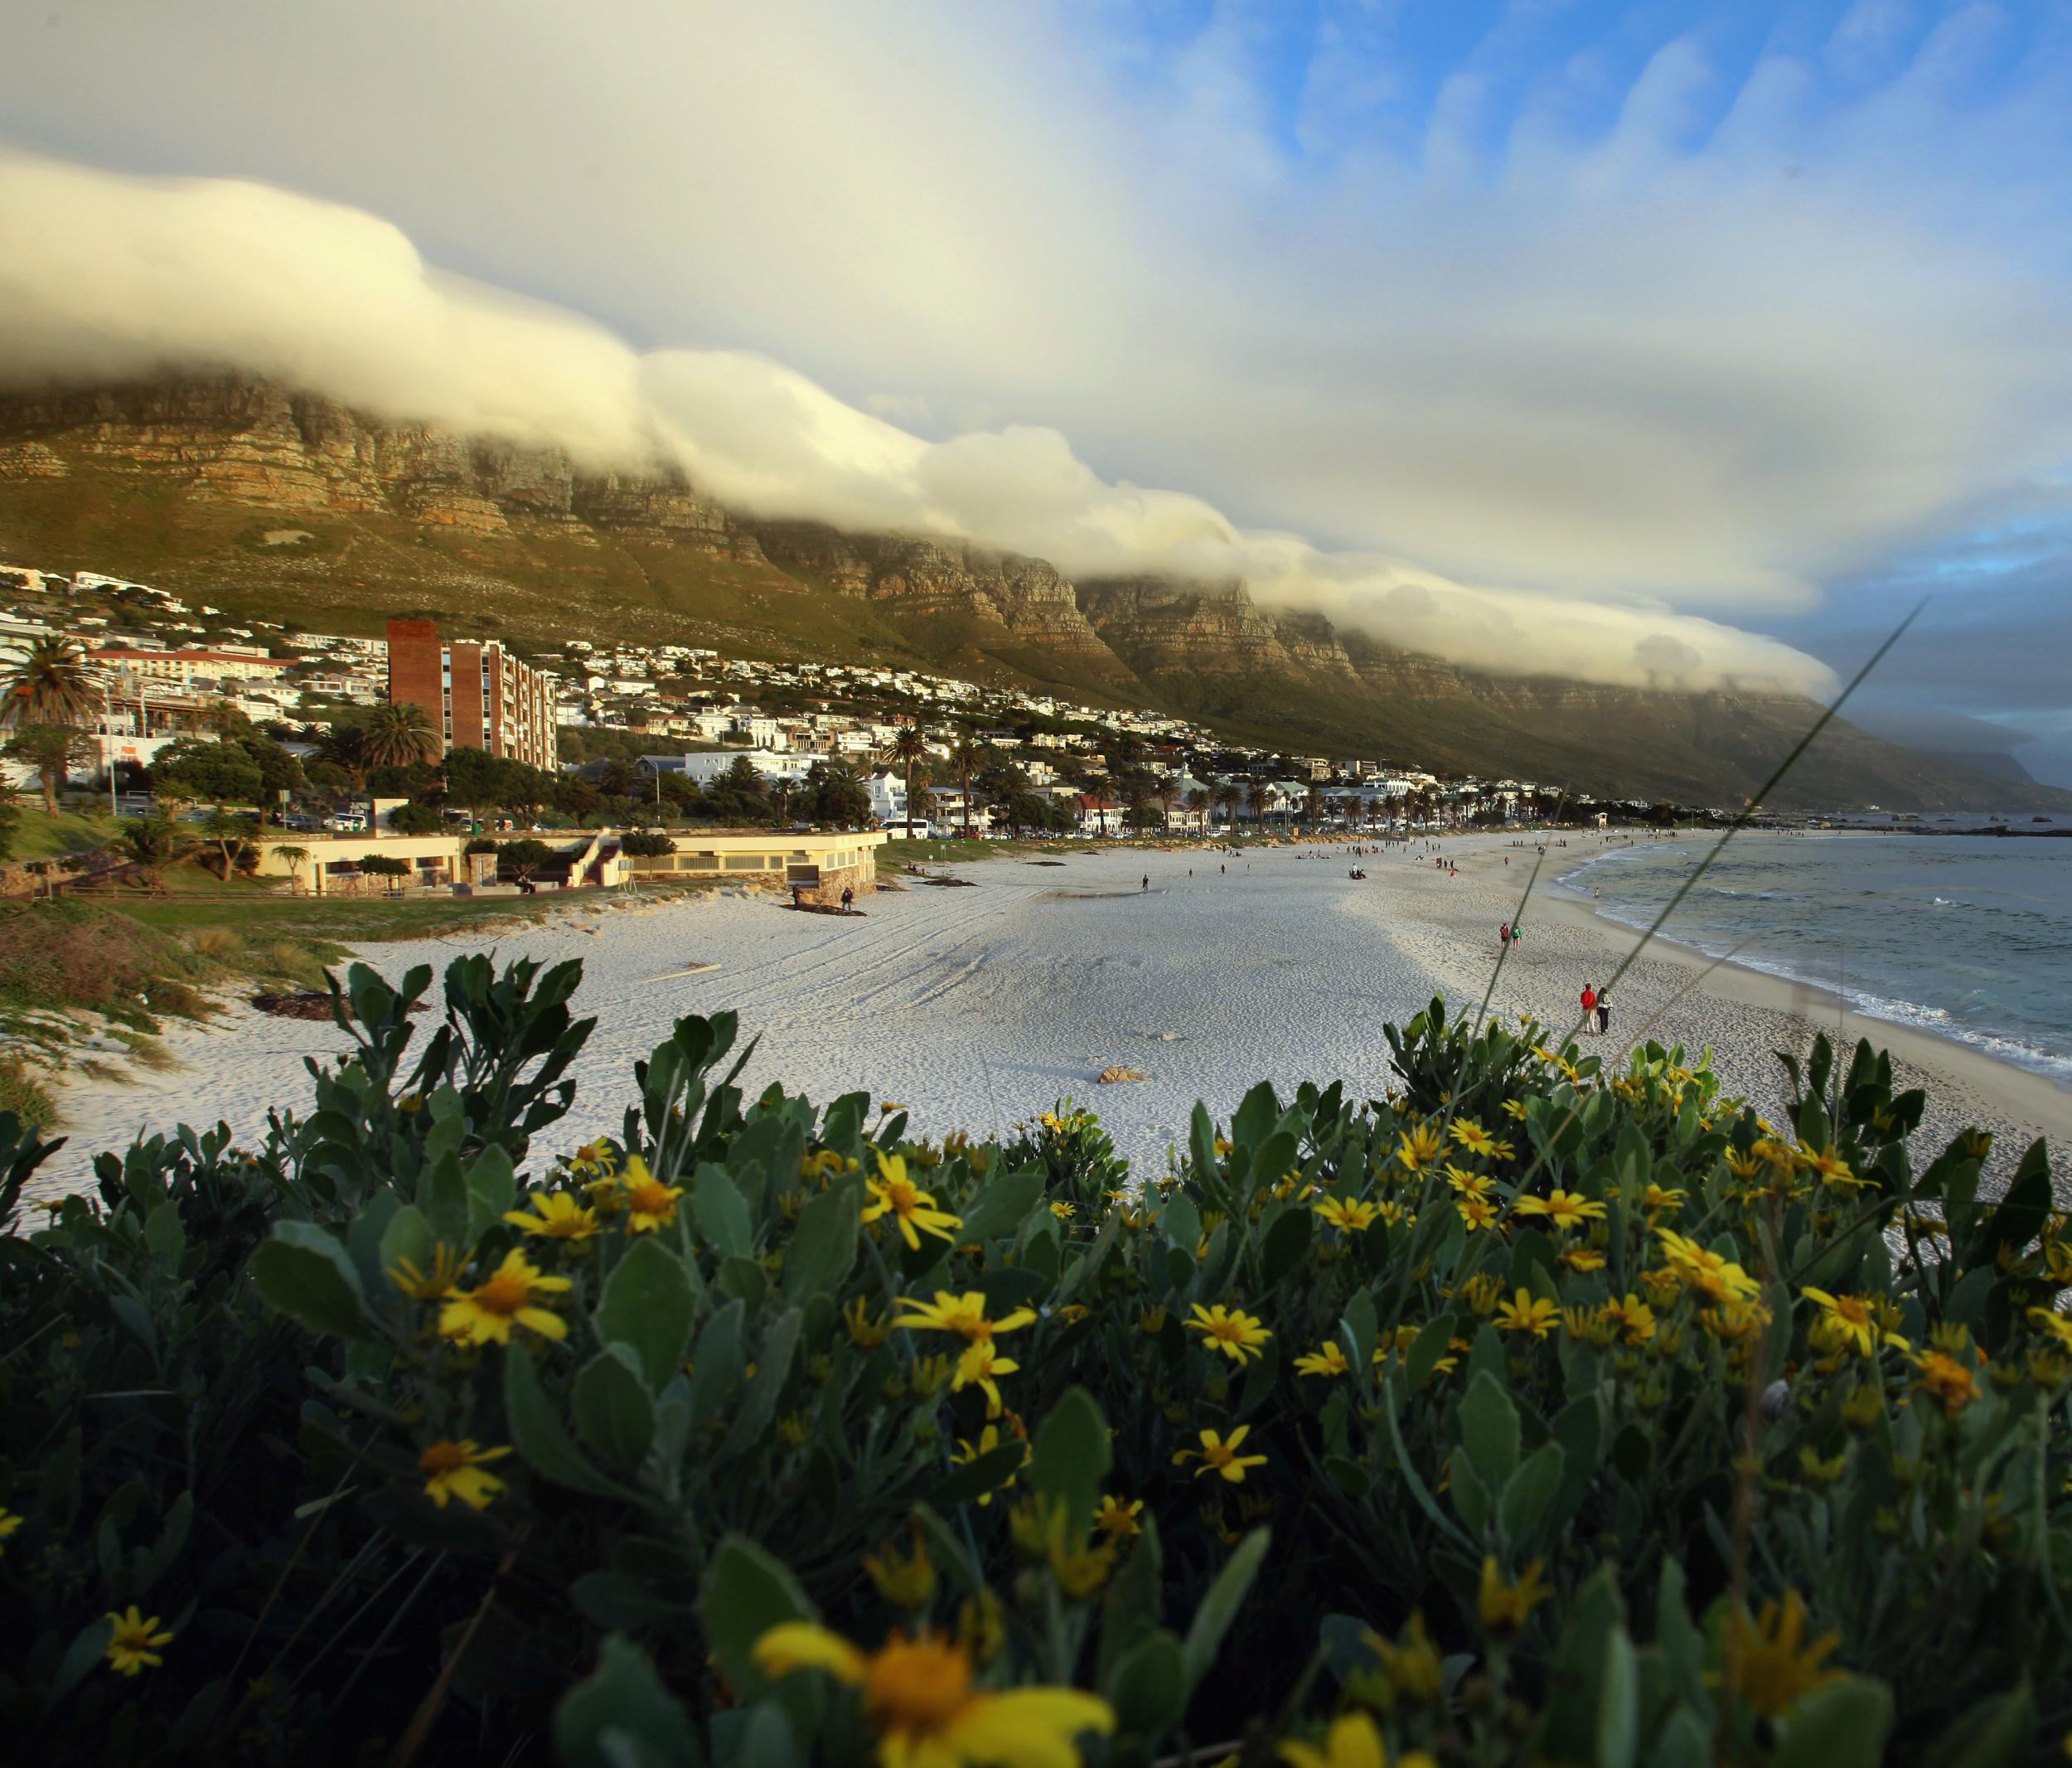 Choosing dates wisely and your flights to Cape Town become almost a third cheaper